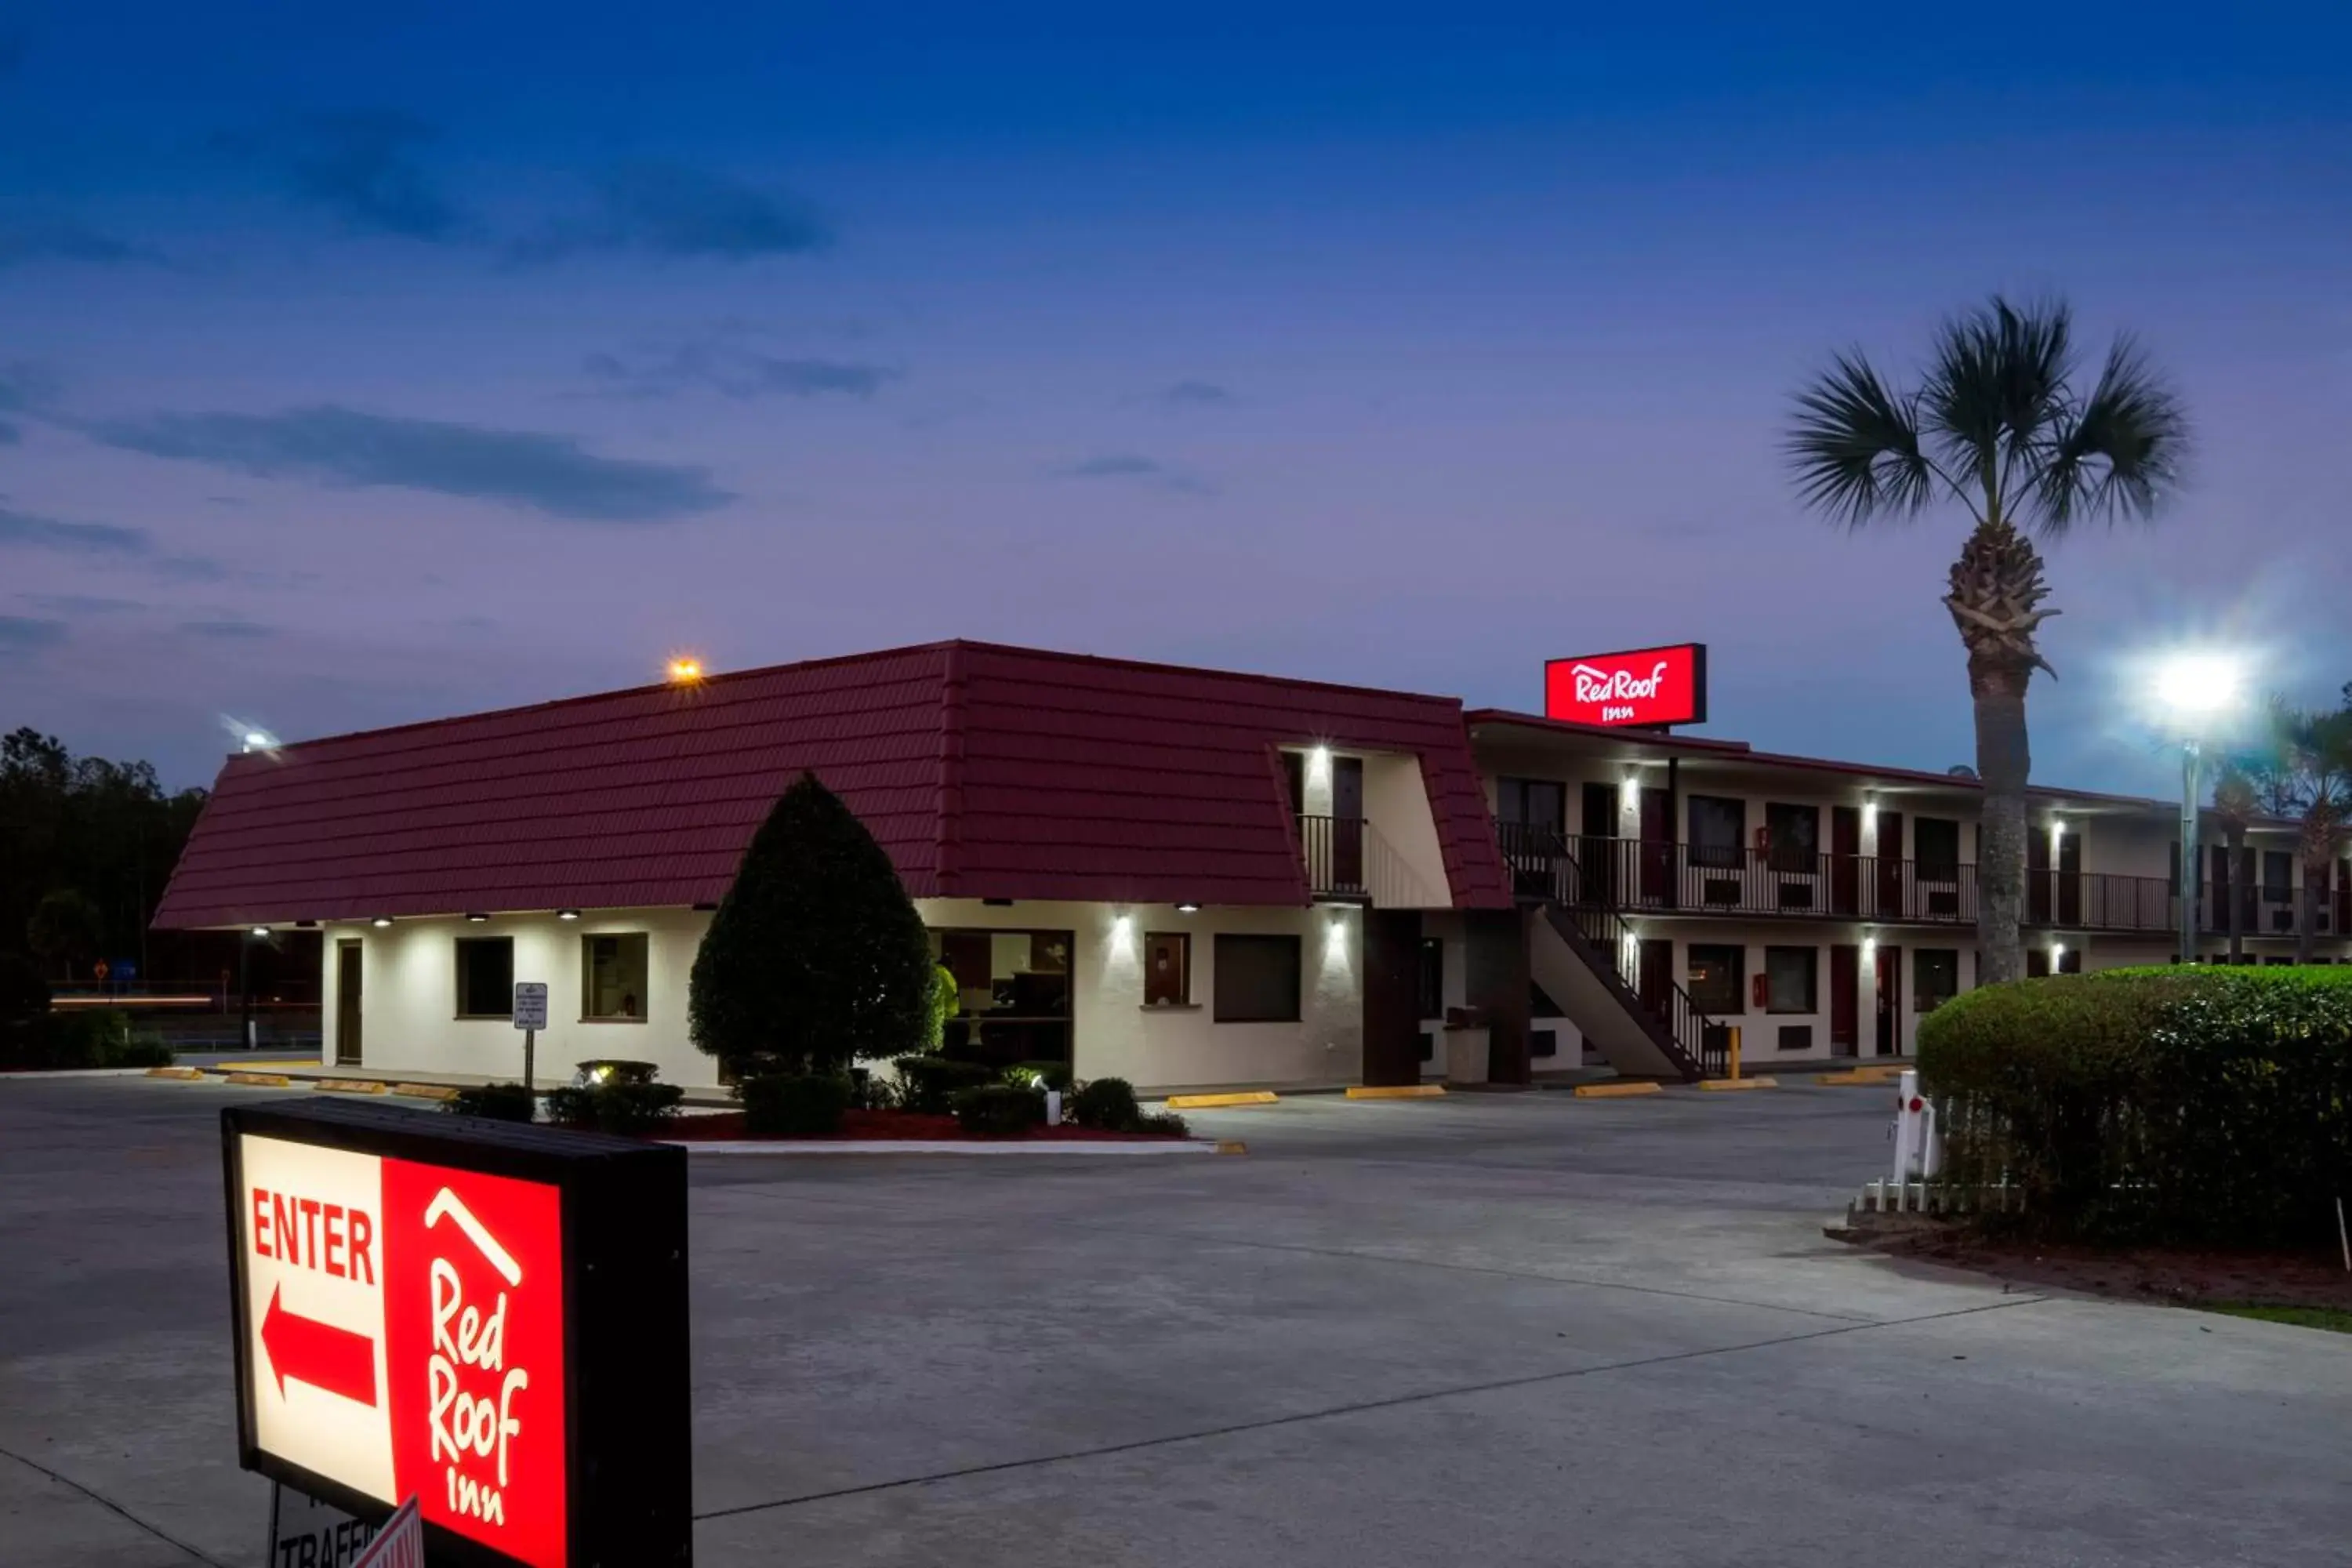 Property Building in Red Roof Inn MacClenny